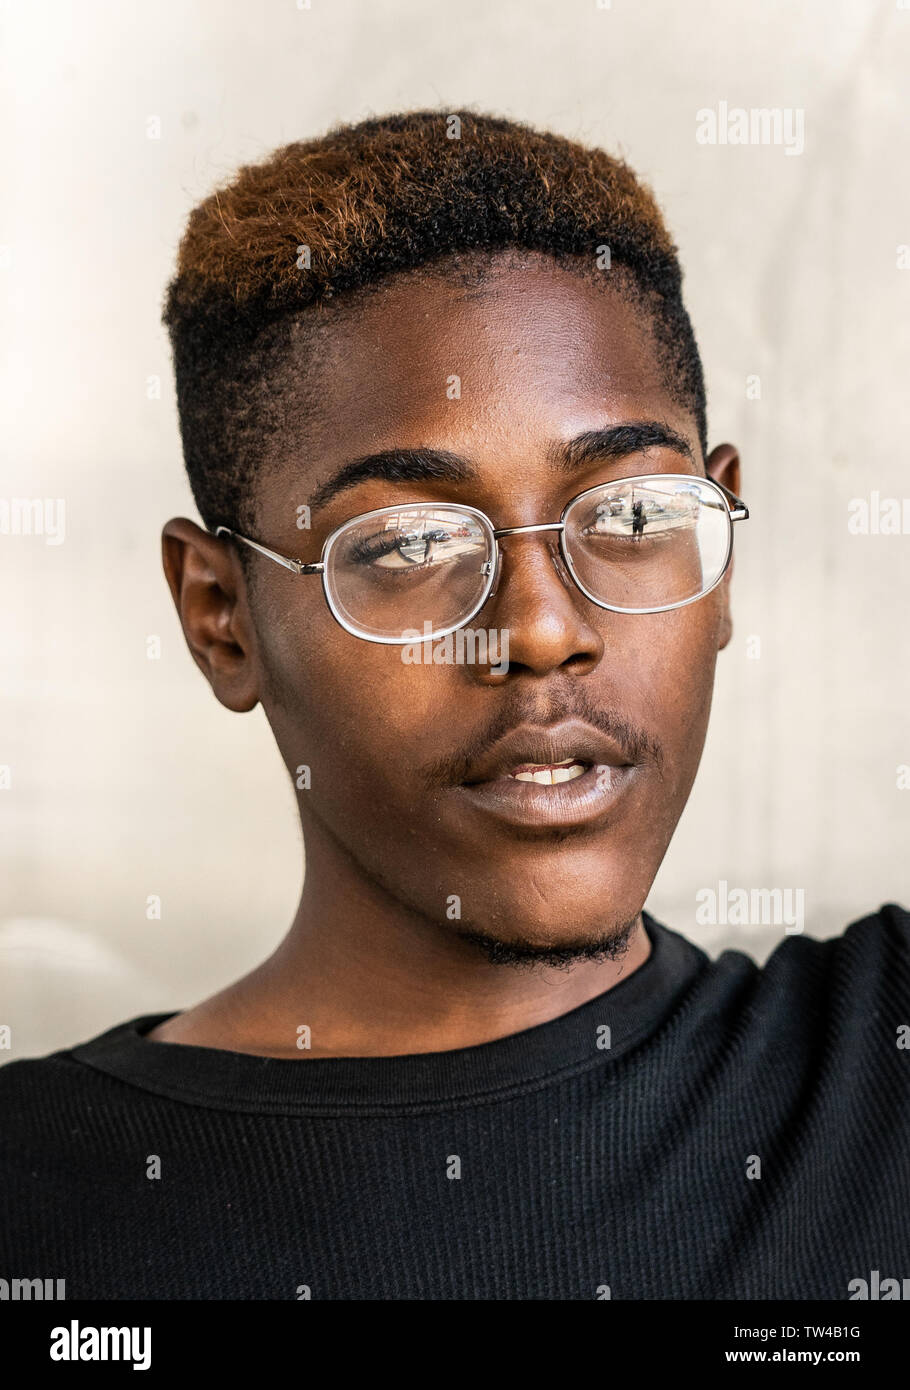 Philadelpia street portrait taken in the inner city of a  young African American man Stock Photo